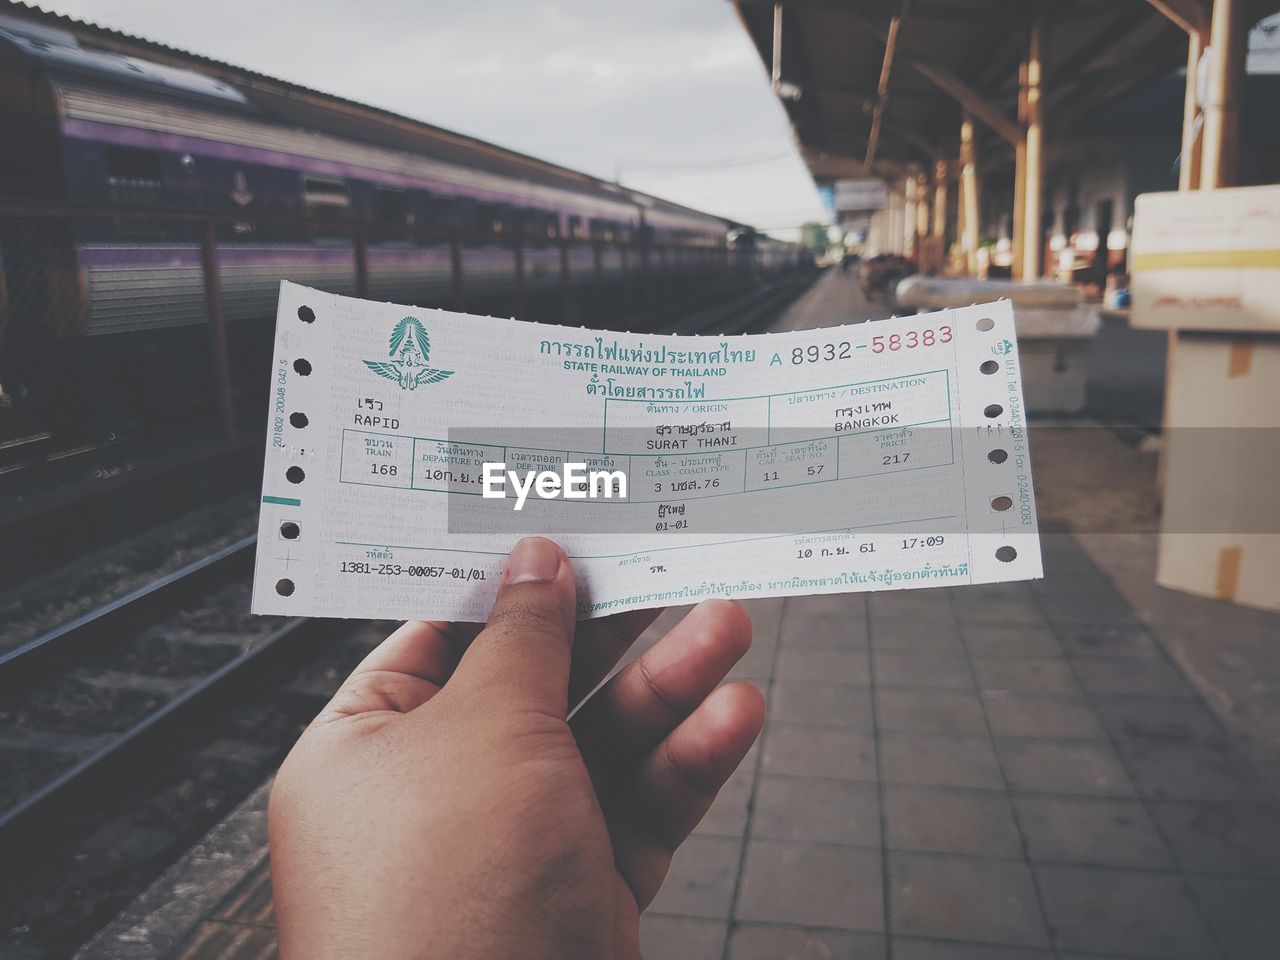 Cropped image of person holding ticket at railroad station